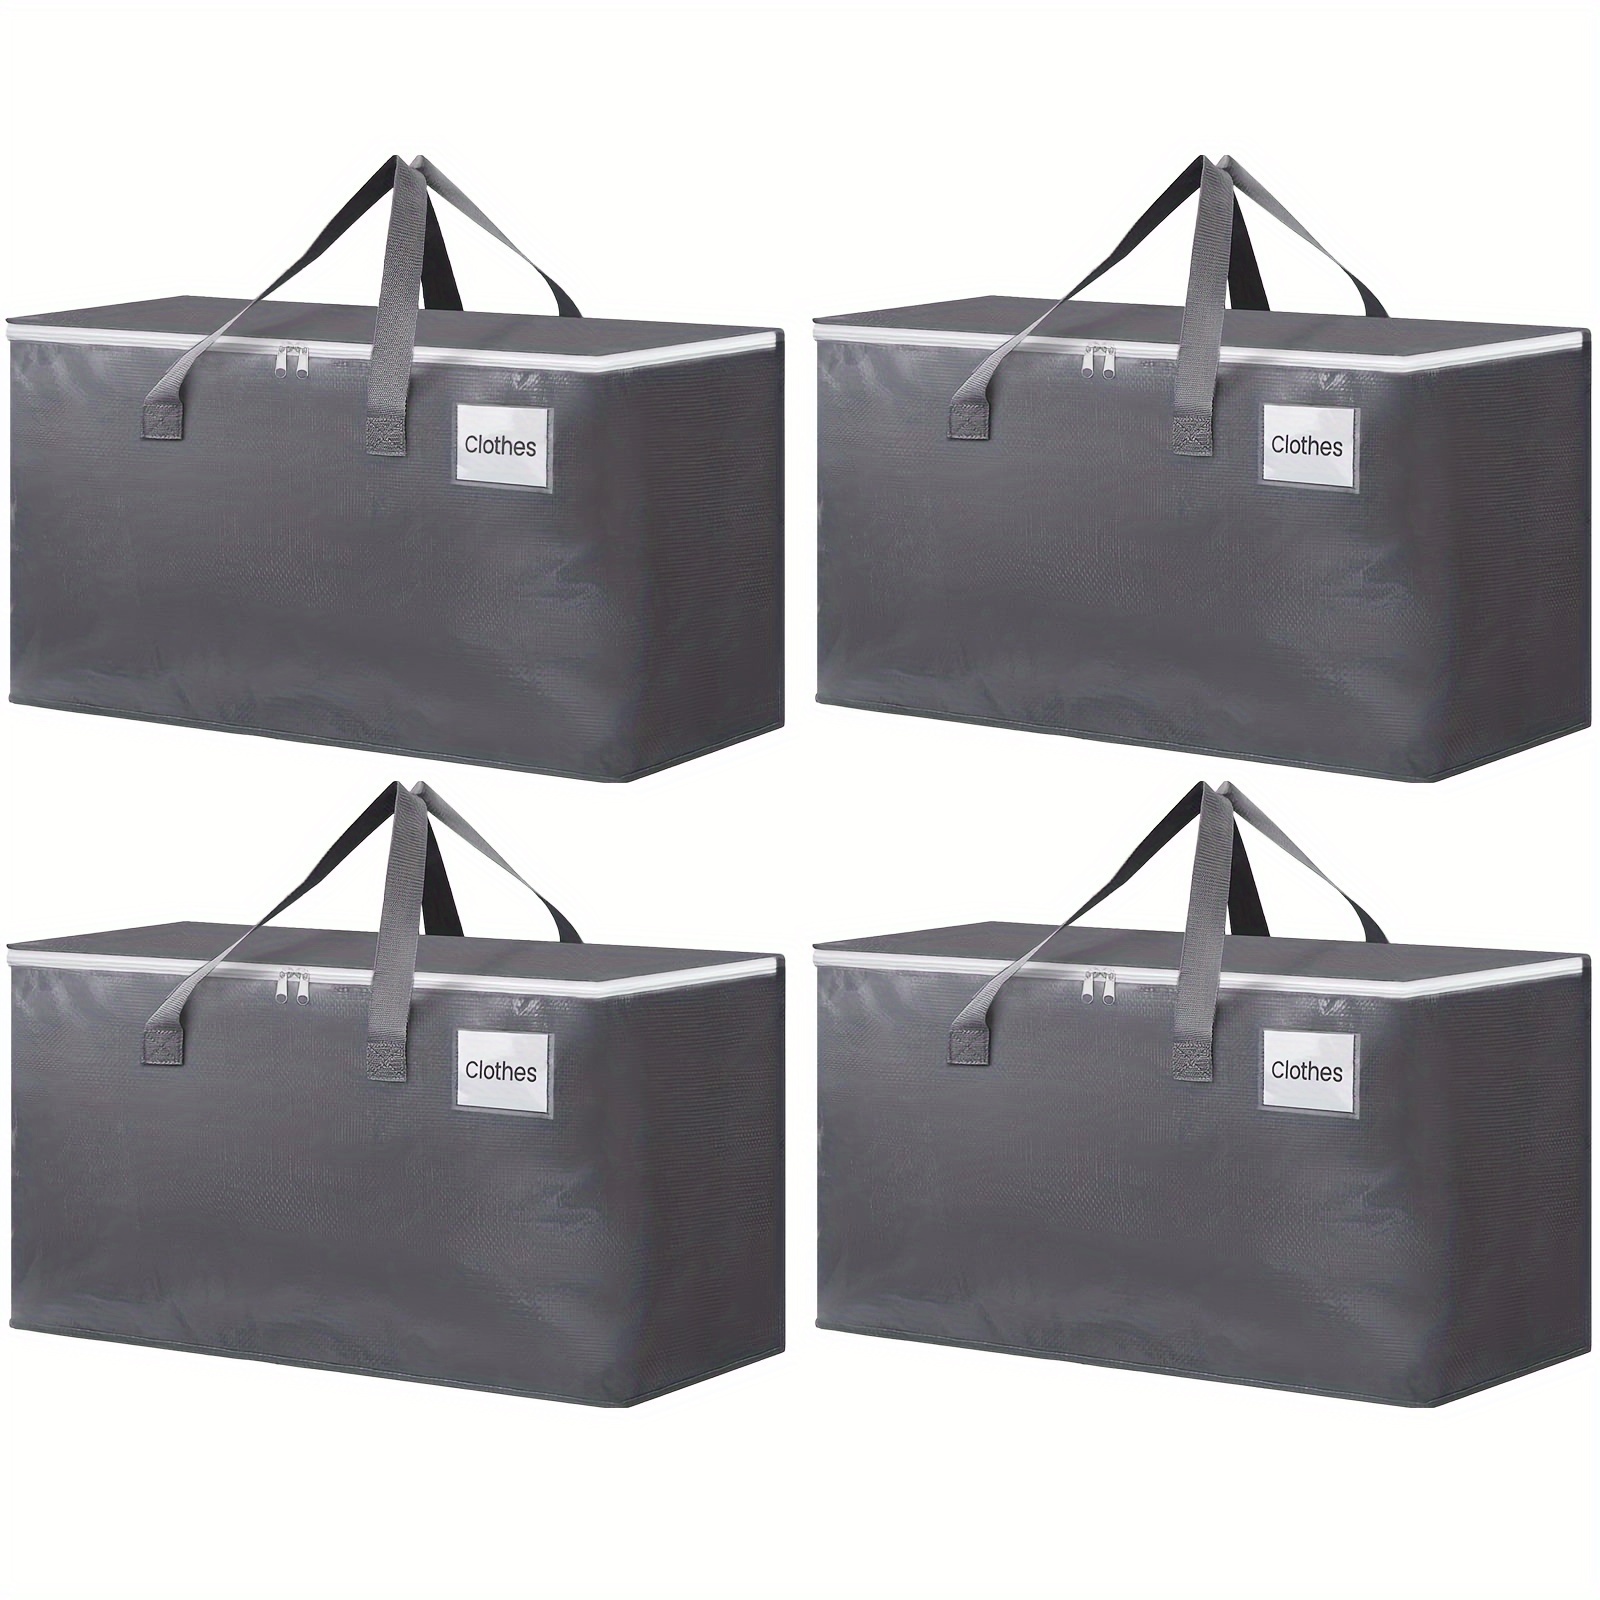  BAG-THAT! 2 Pack XXL Jumbo Extra Large Heavy Duty Stronger  Handles Storage Bags Moving Totes Zippered Reusable Wrap Around Storage  Totes : Home & Kitchen